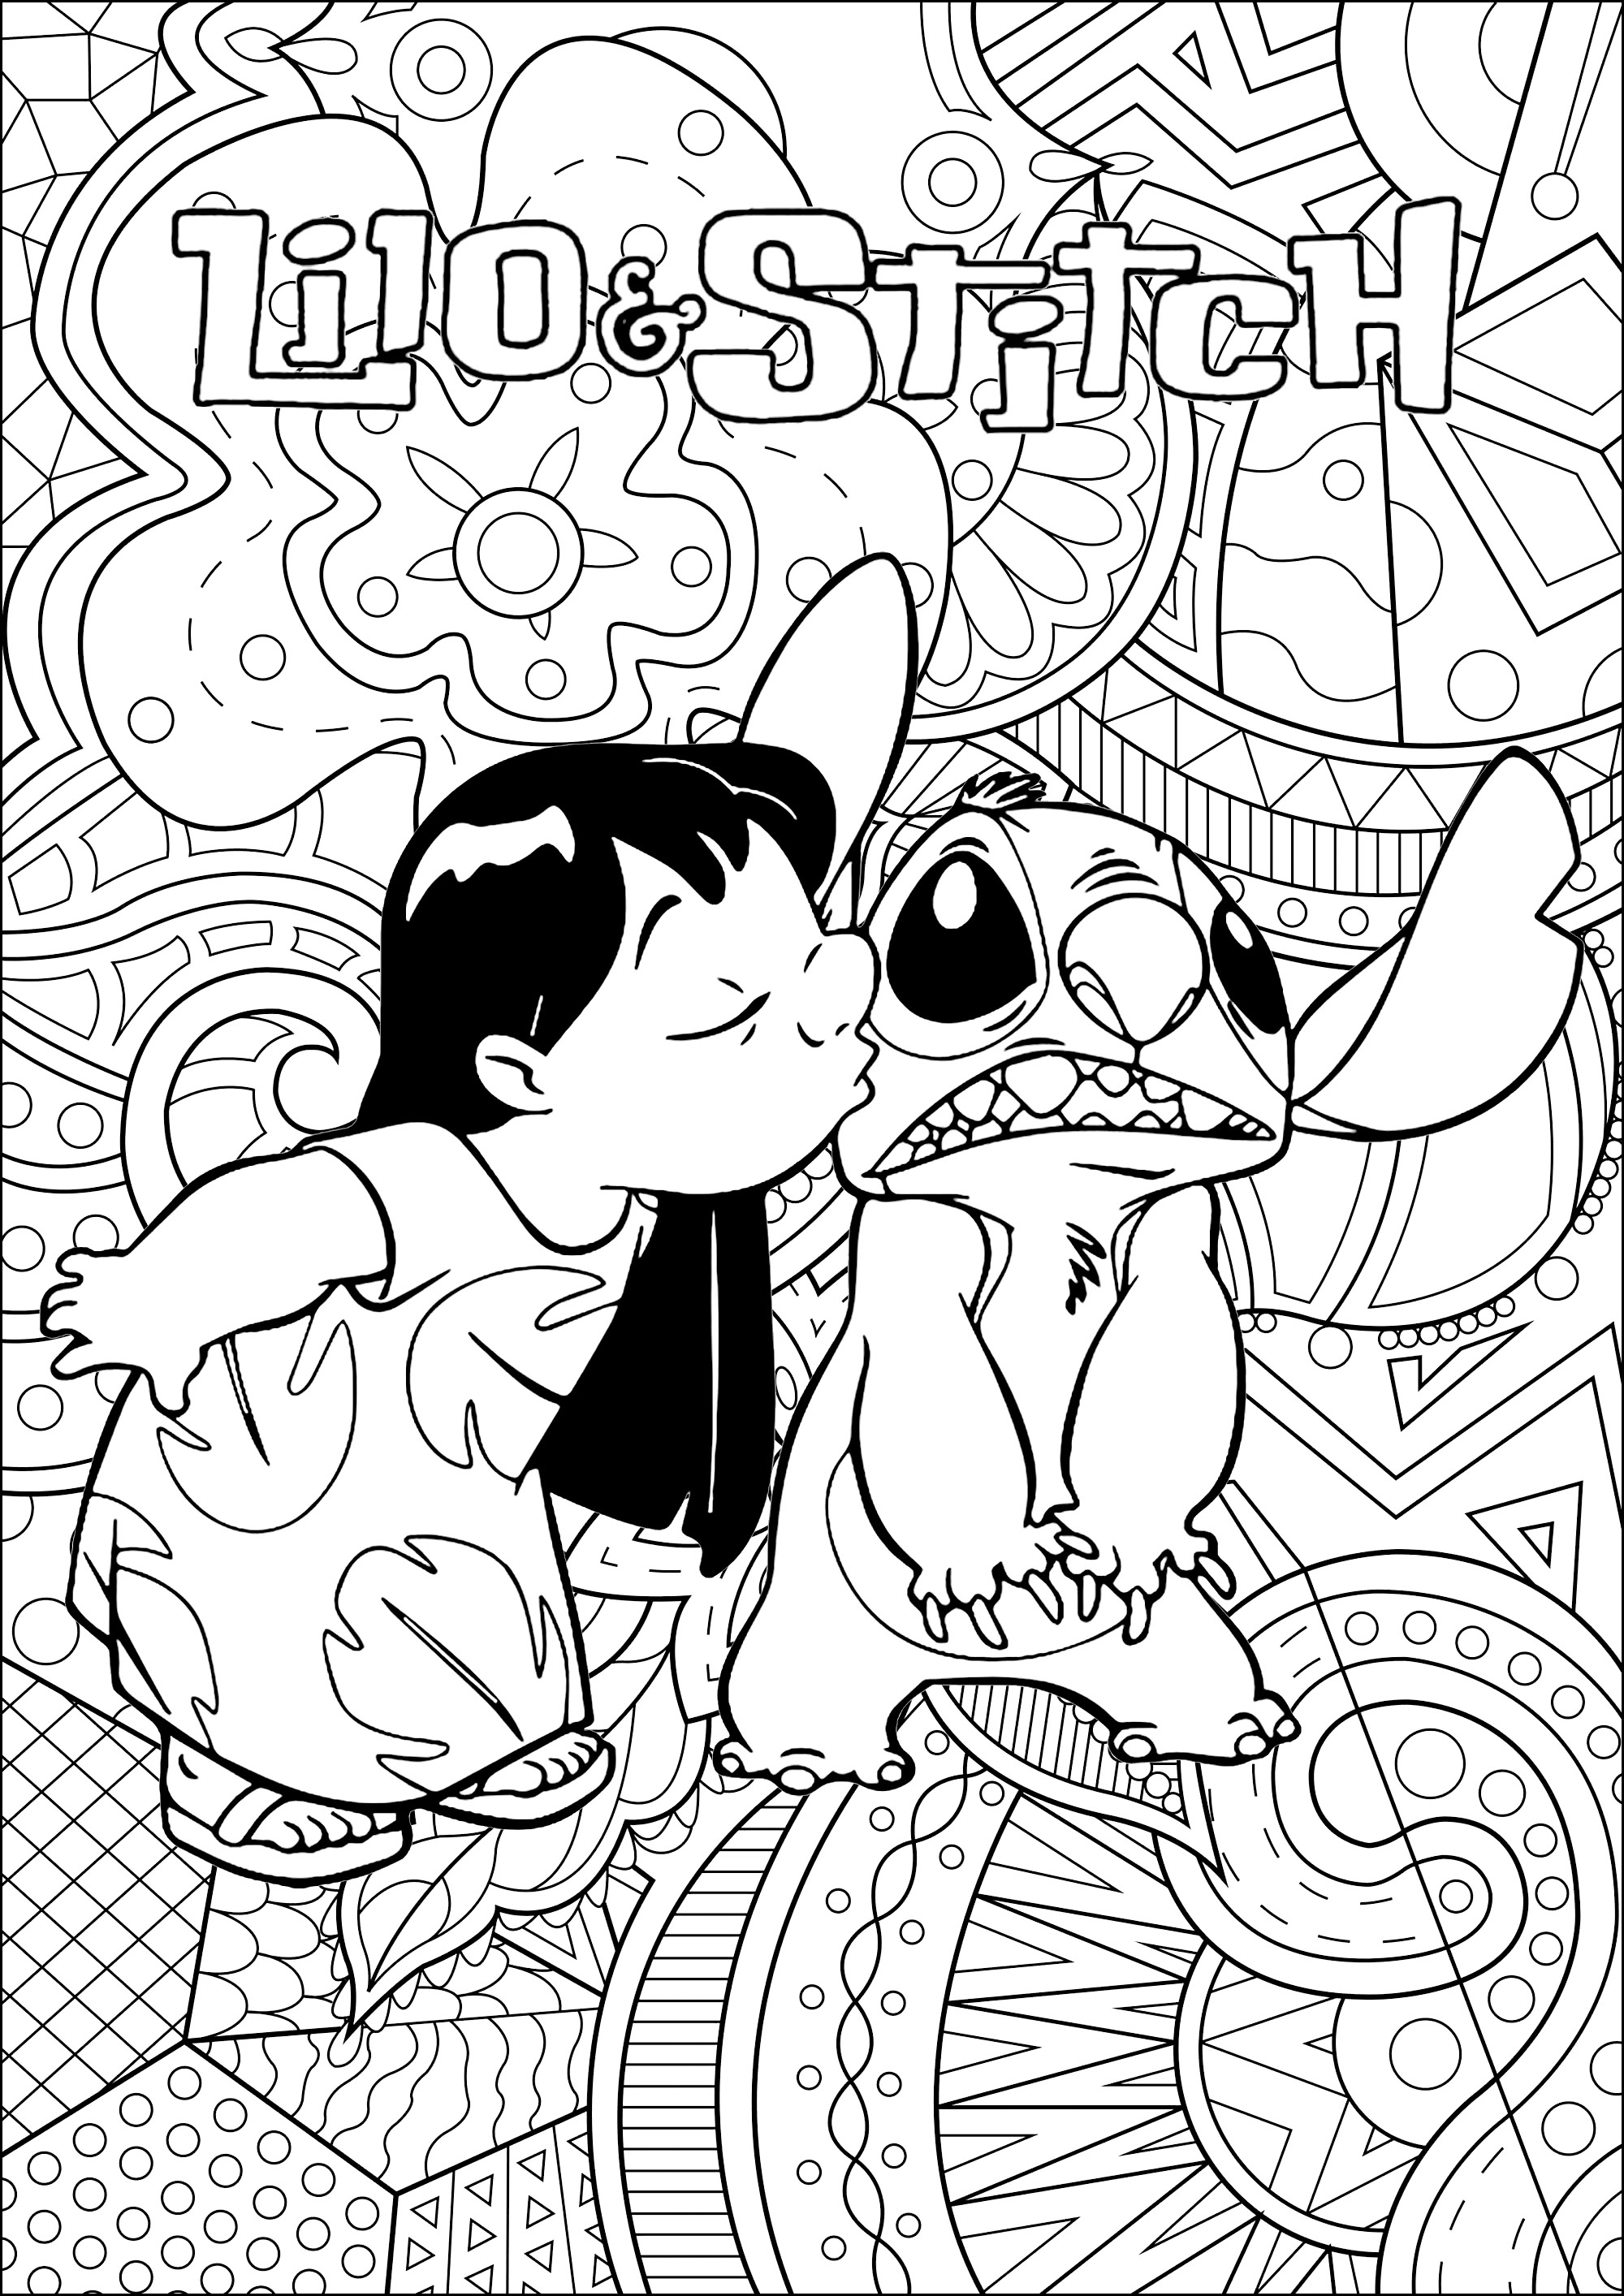 Lilo and Stitch COLORING BOOK: A Coloring Book For Kids and stress